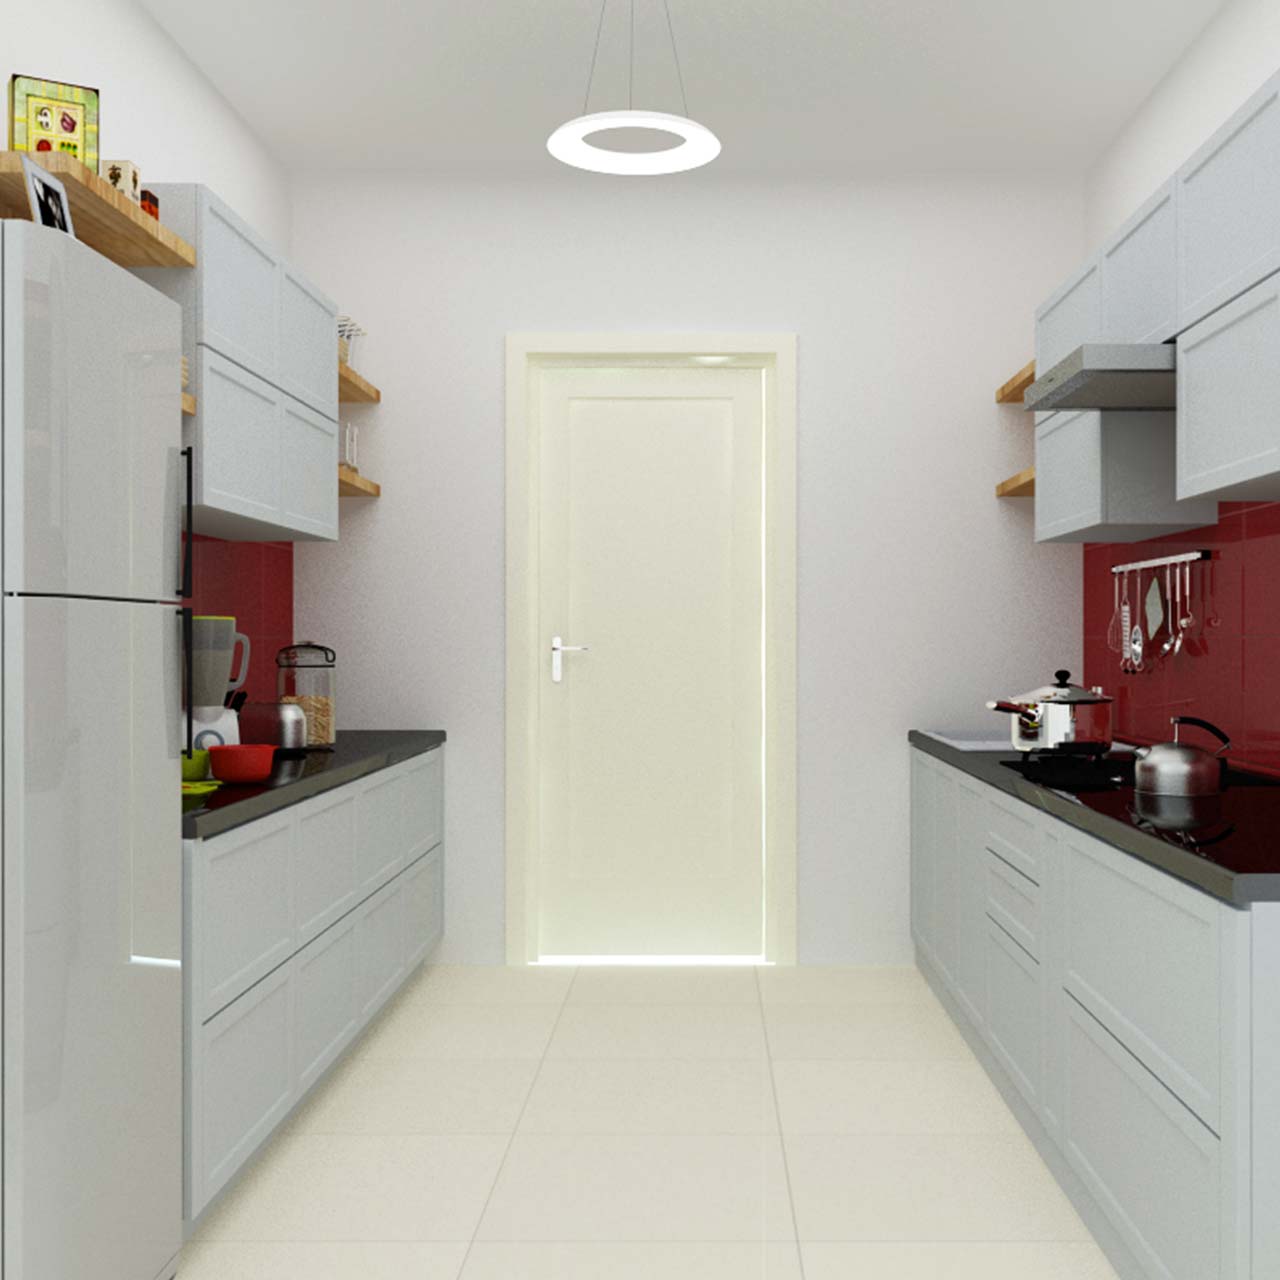 Galley kitchen layout works well with all kitchen styles and galley type of kitchen shape can fit several cabinets and house doors